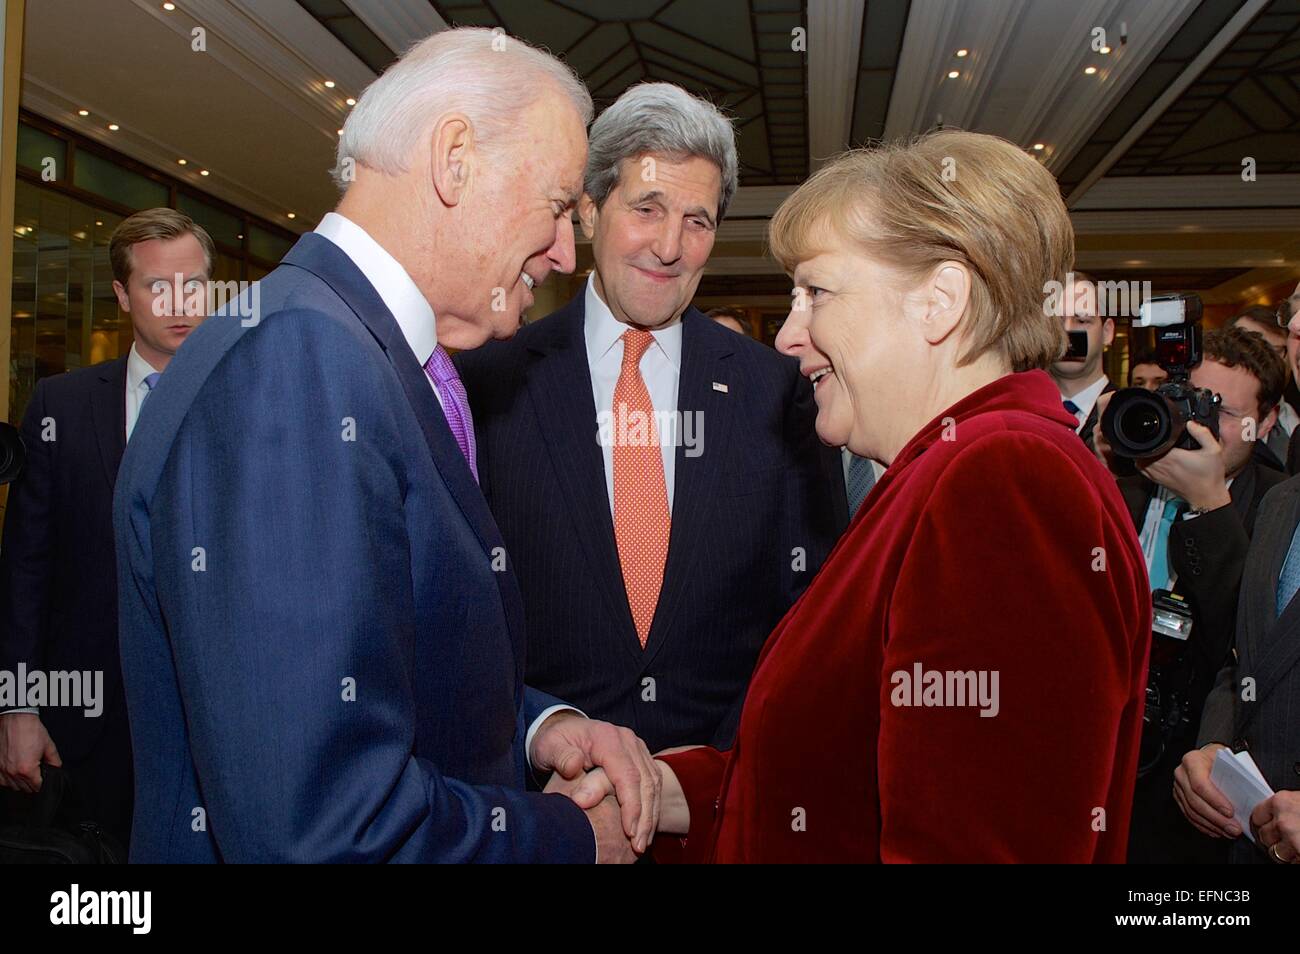 US Vice President Joe Biden and Secretary of State John Kerry greet German Chancellor Angela Merkel on the sidelines of the Munich Security Conference February 7, 2015 in Munich, Germany. Stock Photo